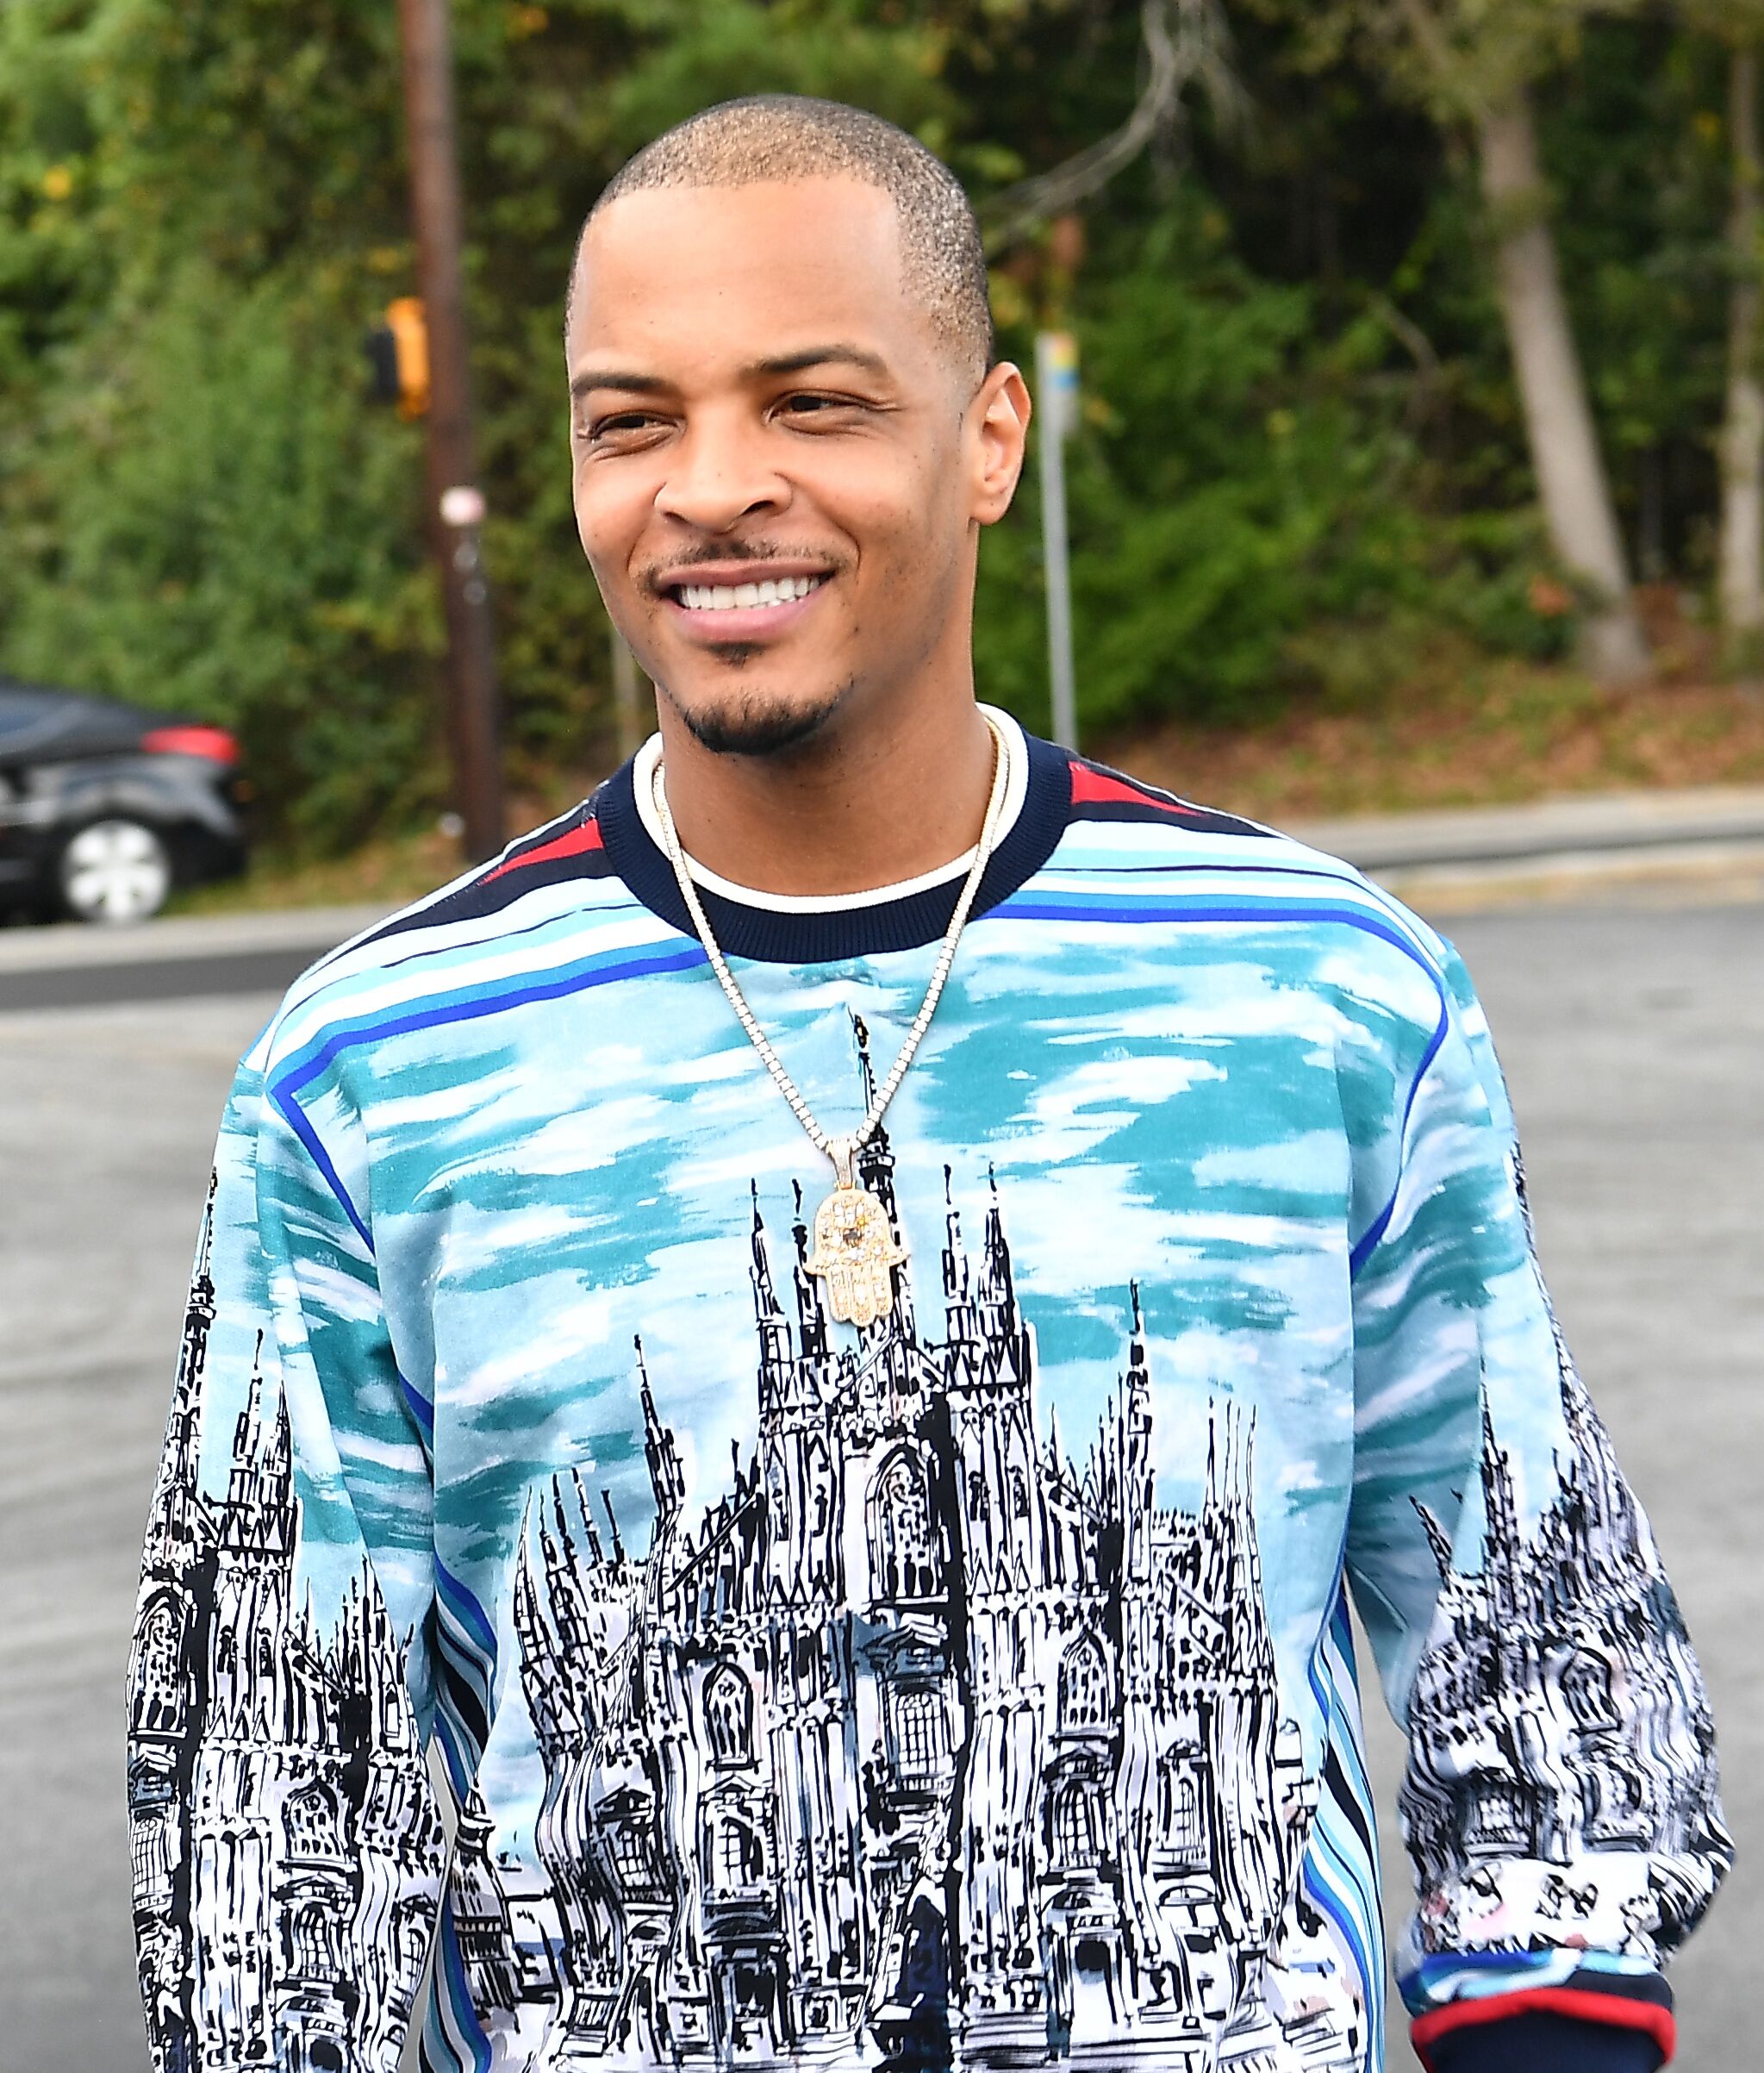 Rapper and reality star Tip "T.I." Harris/ Source: Getty Images